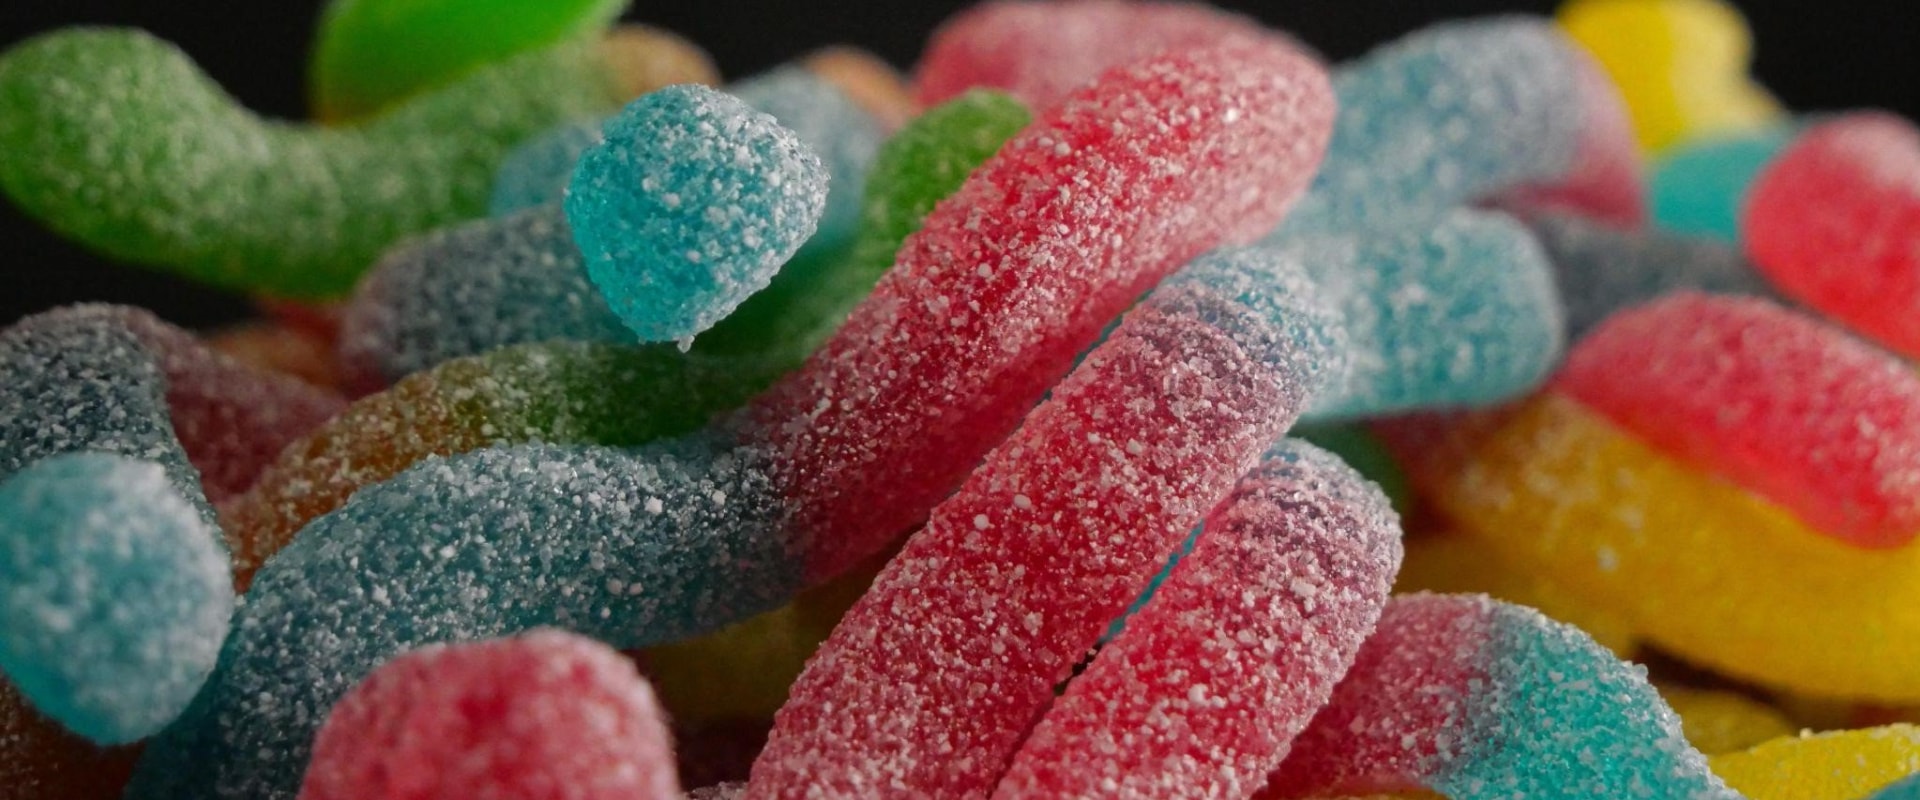 Can i mix different flavors of delta 9 gummies together?